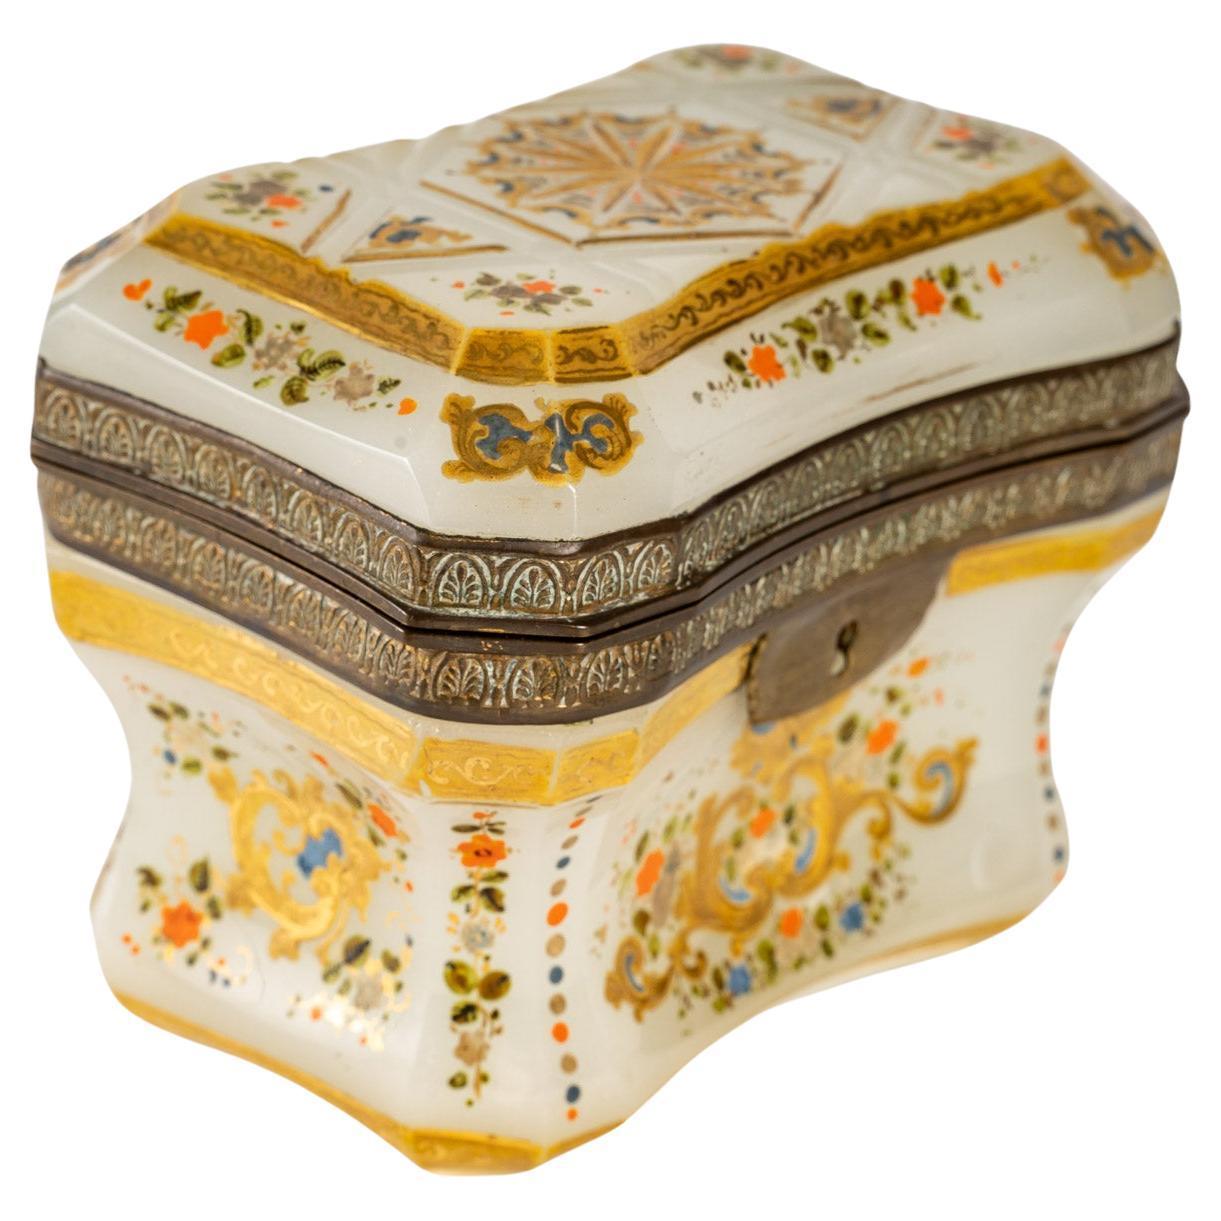 White opaline box, 19th century
White opaline box, enamelled, Mid-19th Century, mounted with gilded brass.
Measures: H: 10.5 cm, W: 13 cm, D: 9 cm.
 